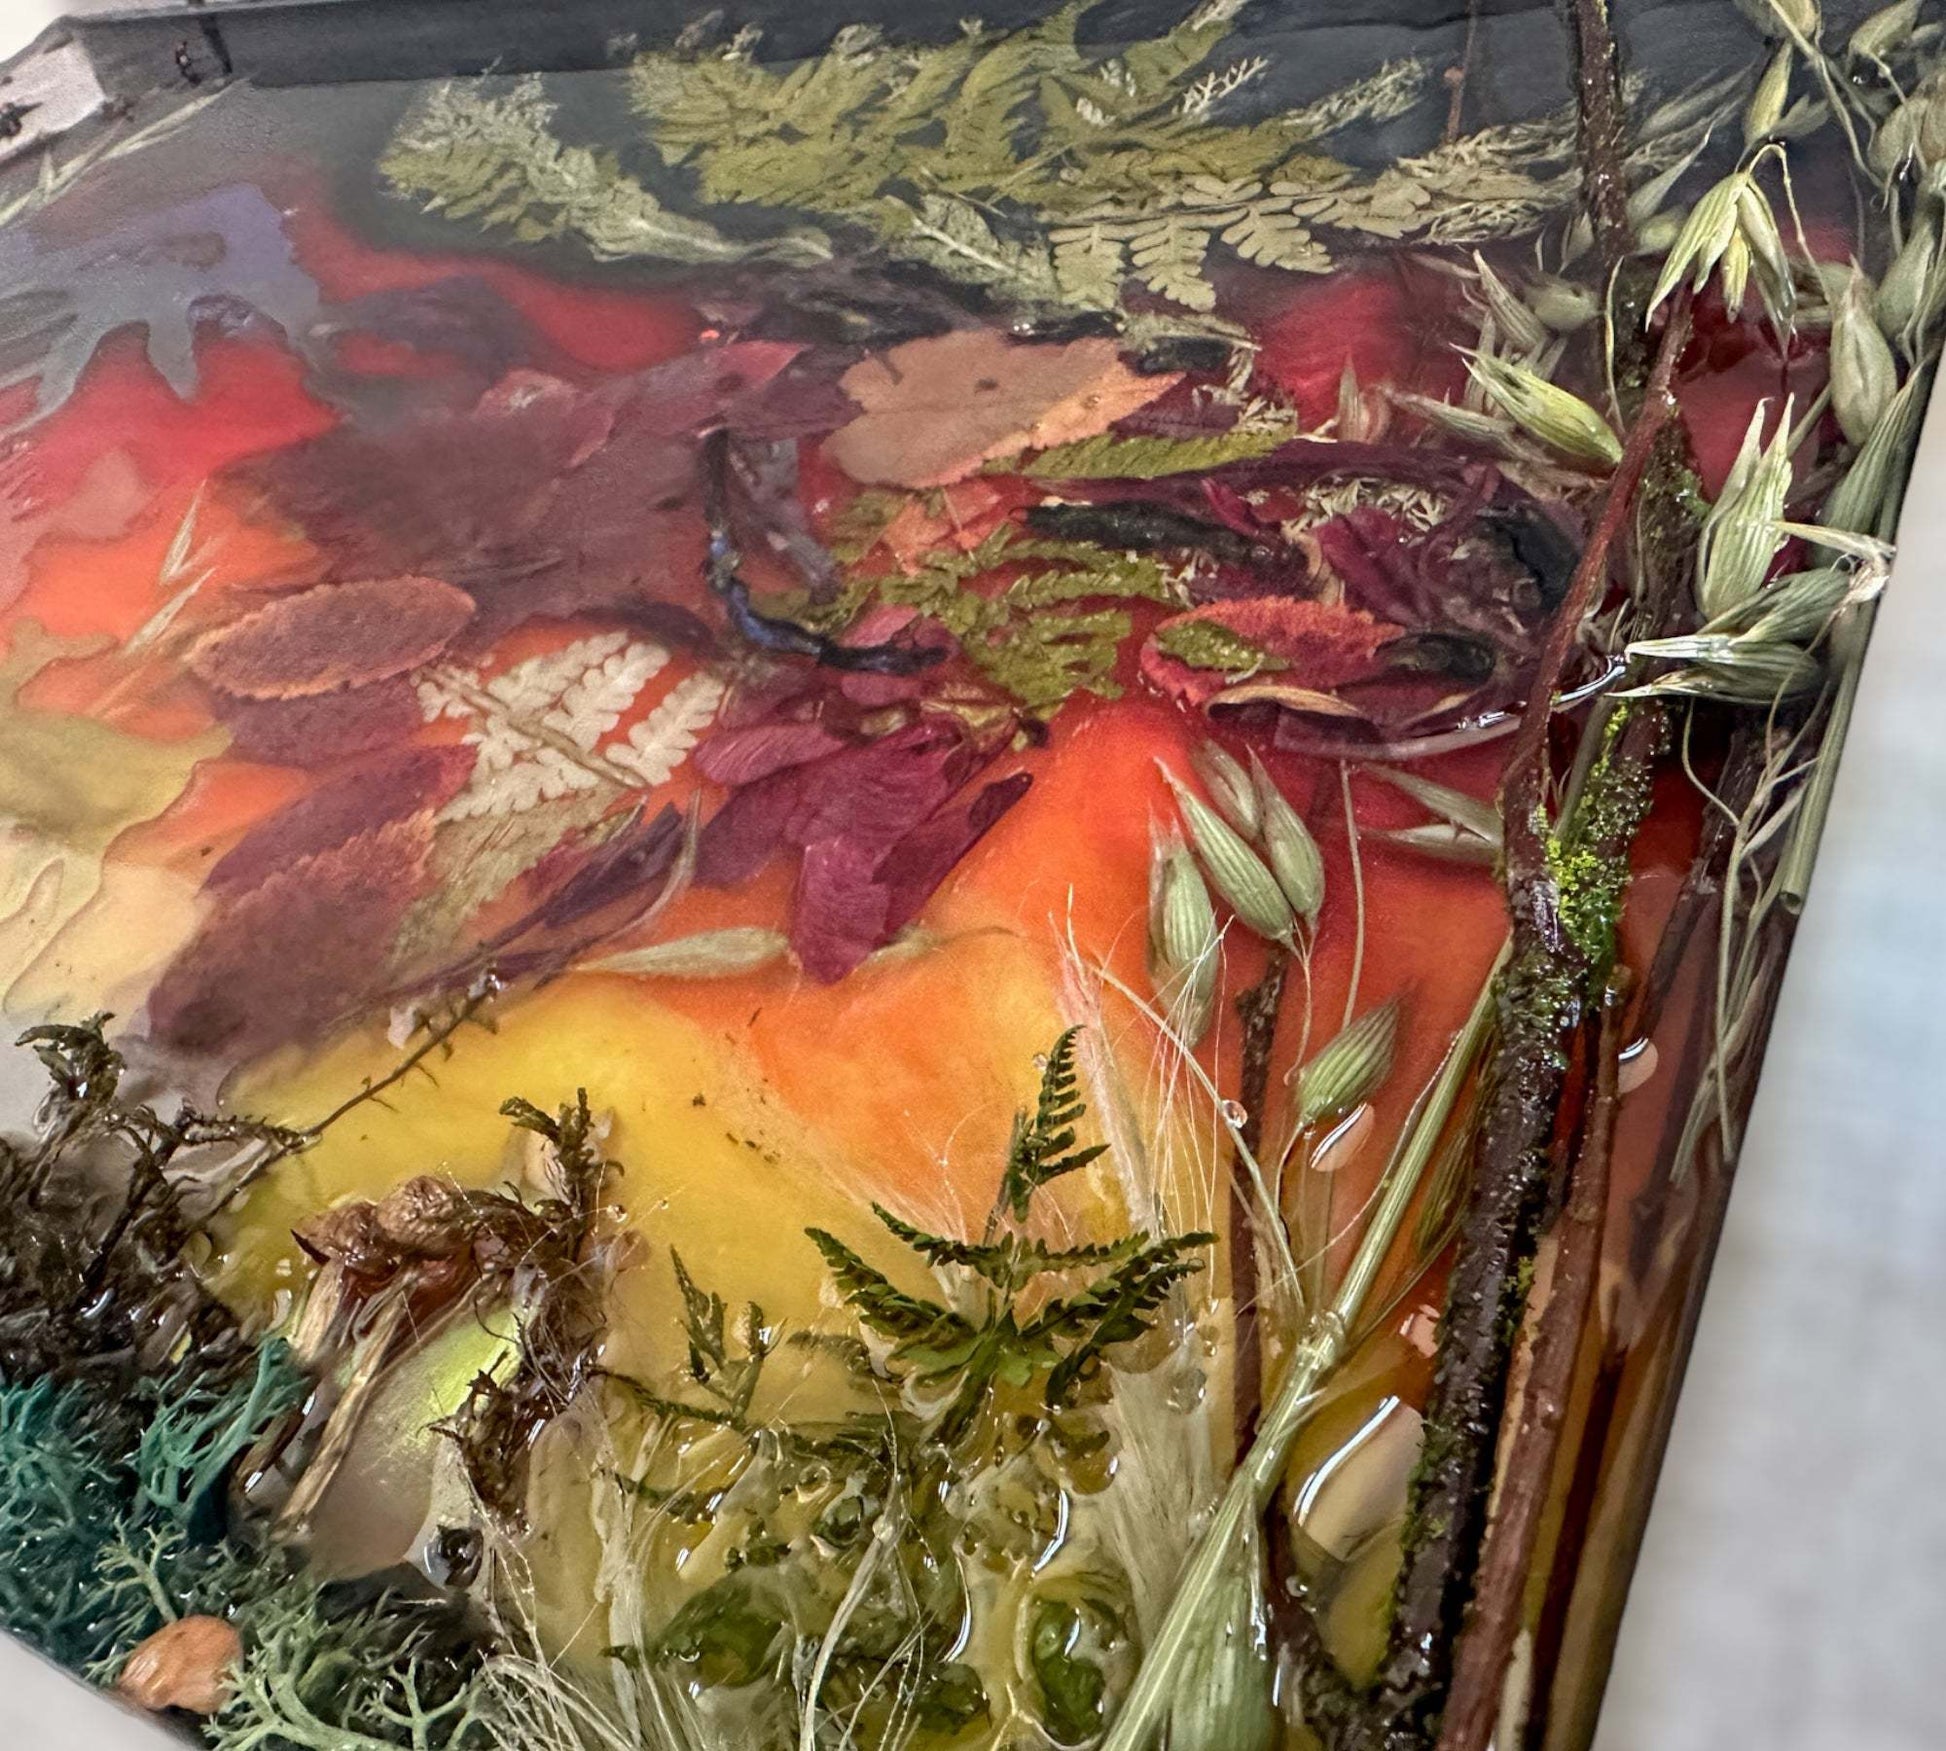 Majestic Wilderness - Enchanting Forest Sunset Resin Picture 